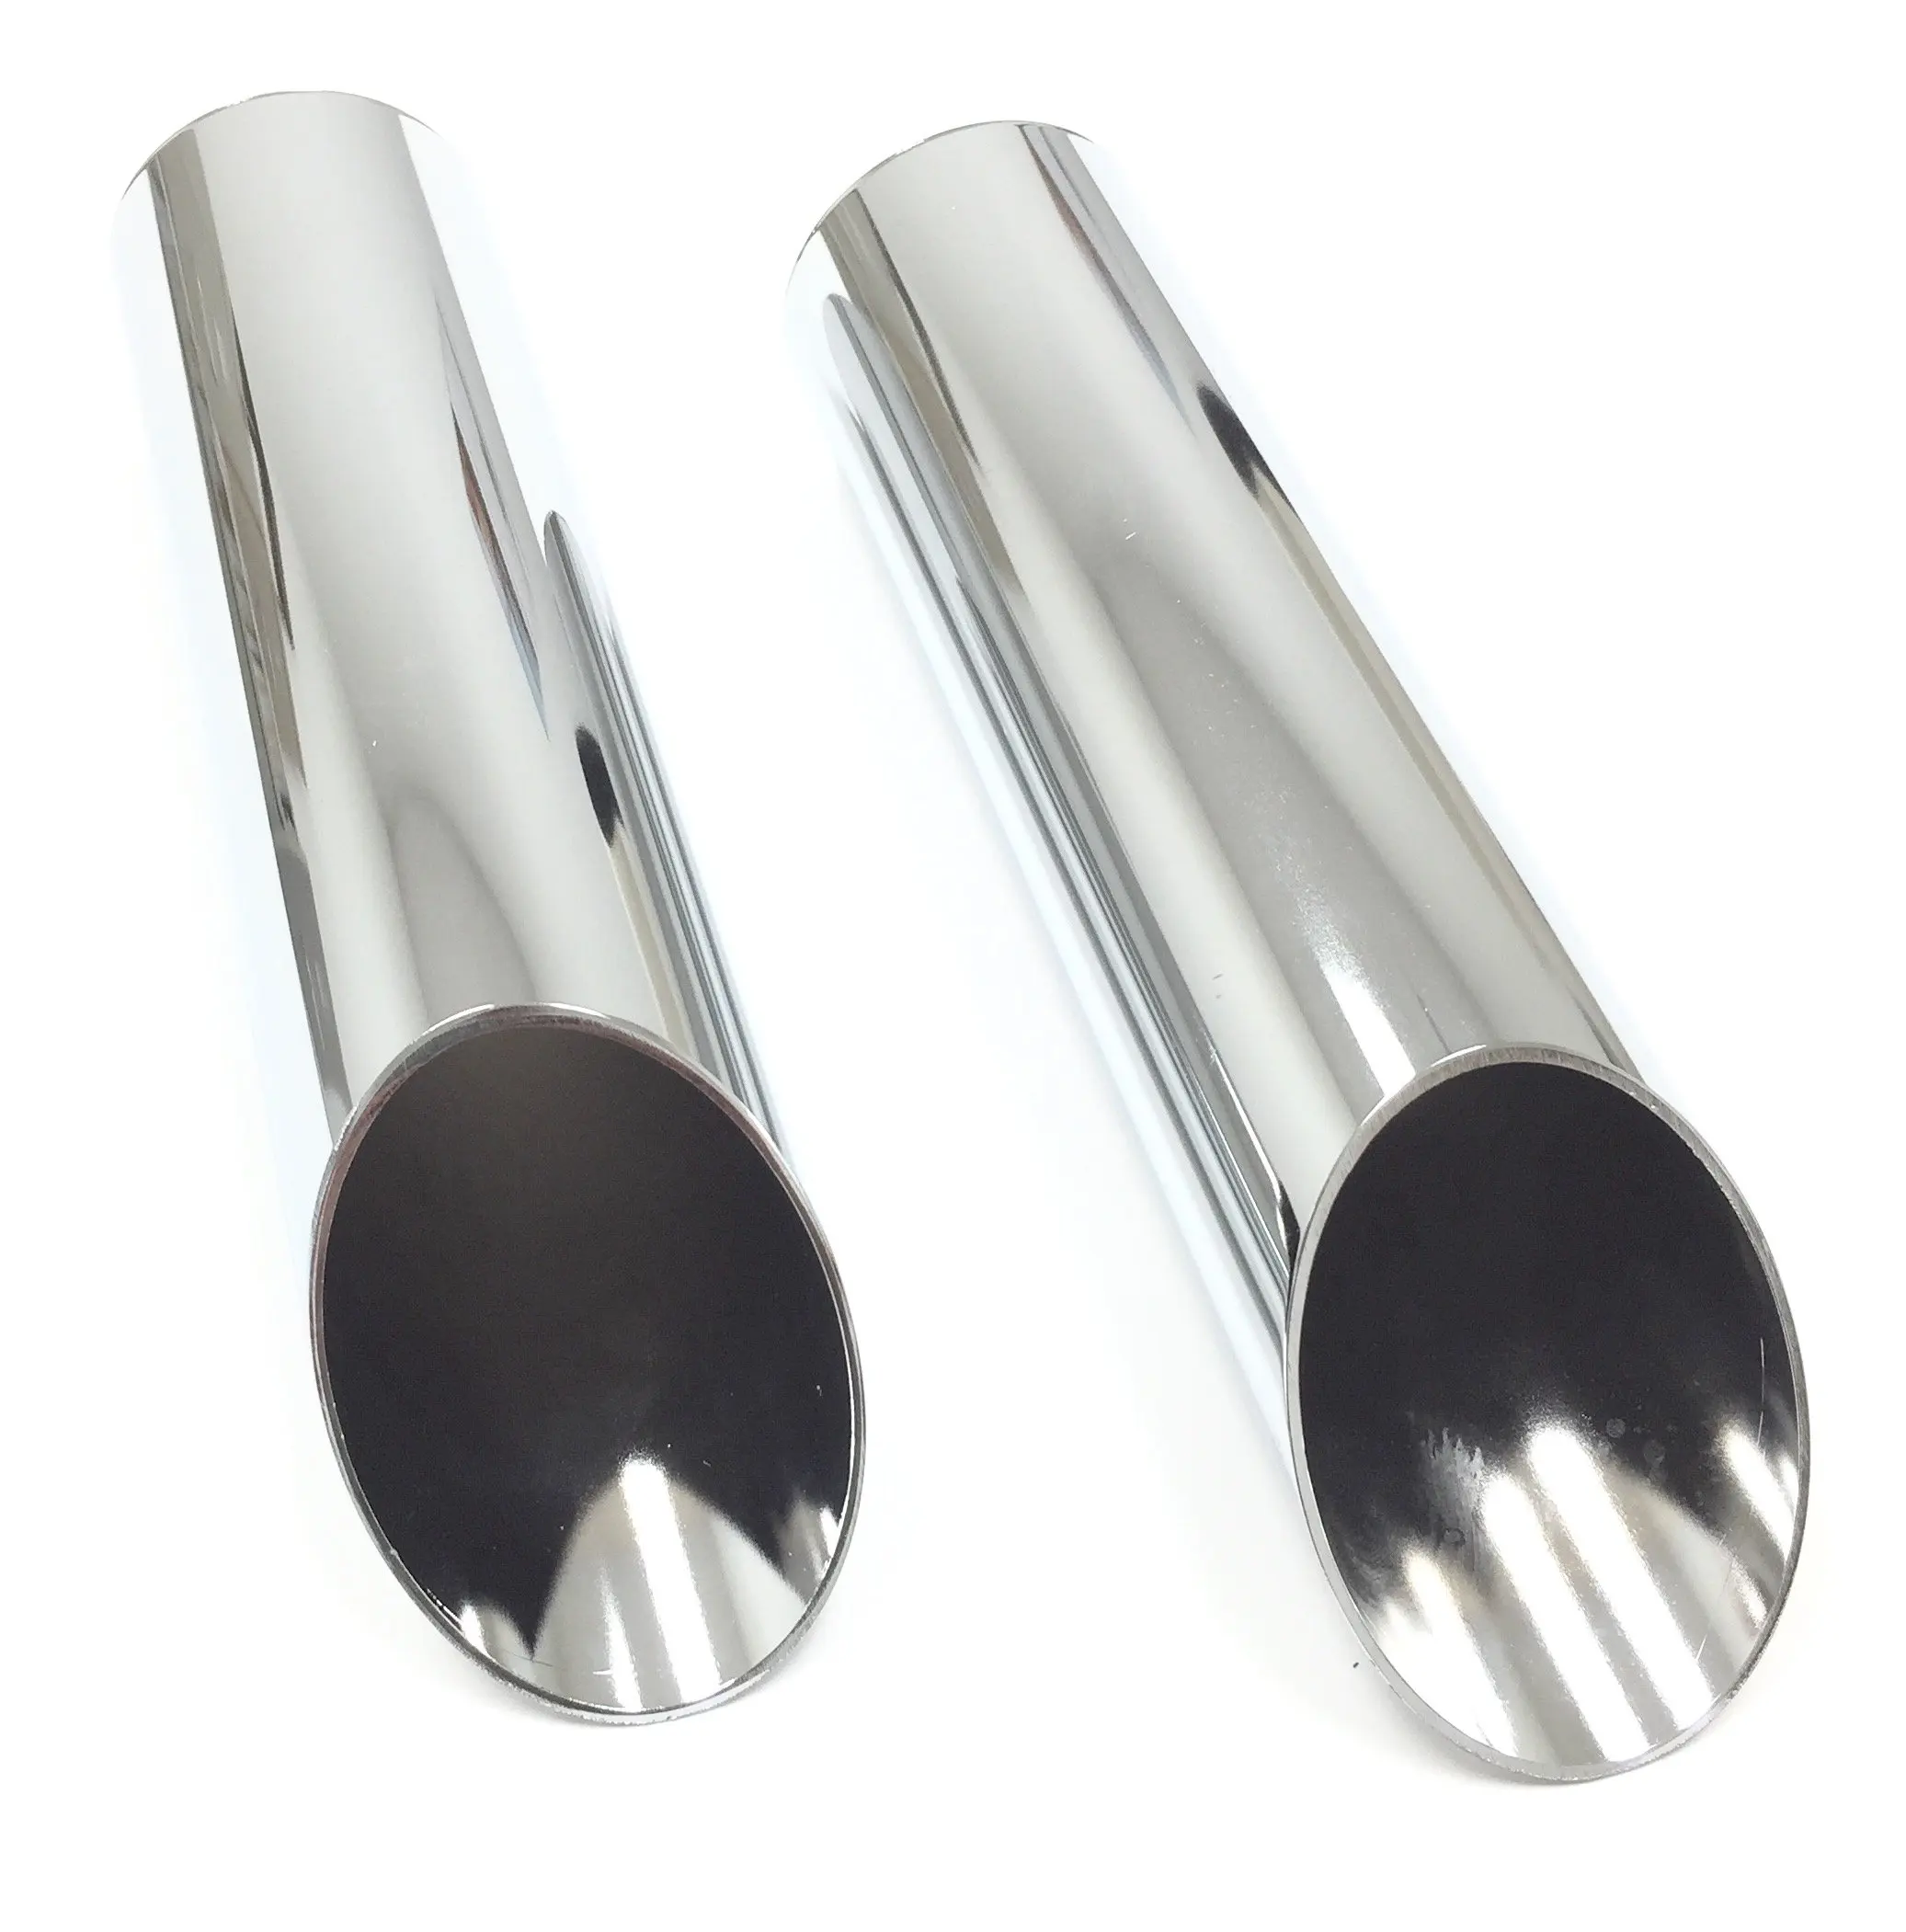 Cheap 3 Inch Chrome Exhaust Tips, find 3 Inch Chrome Exhaust Tips deals